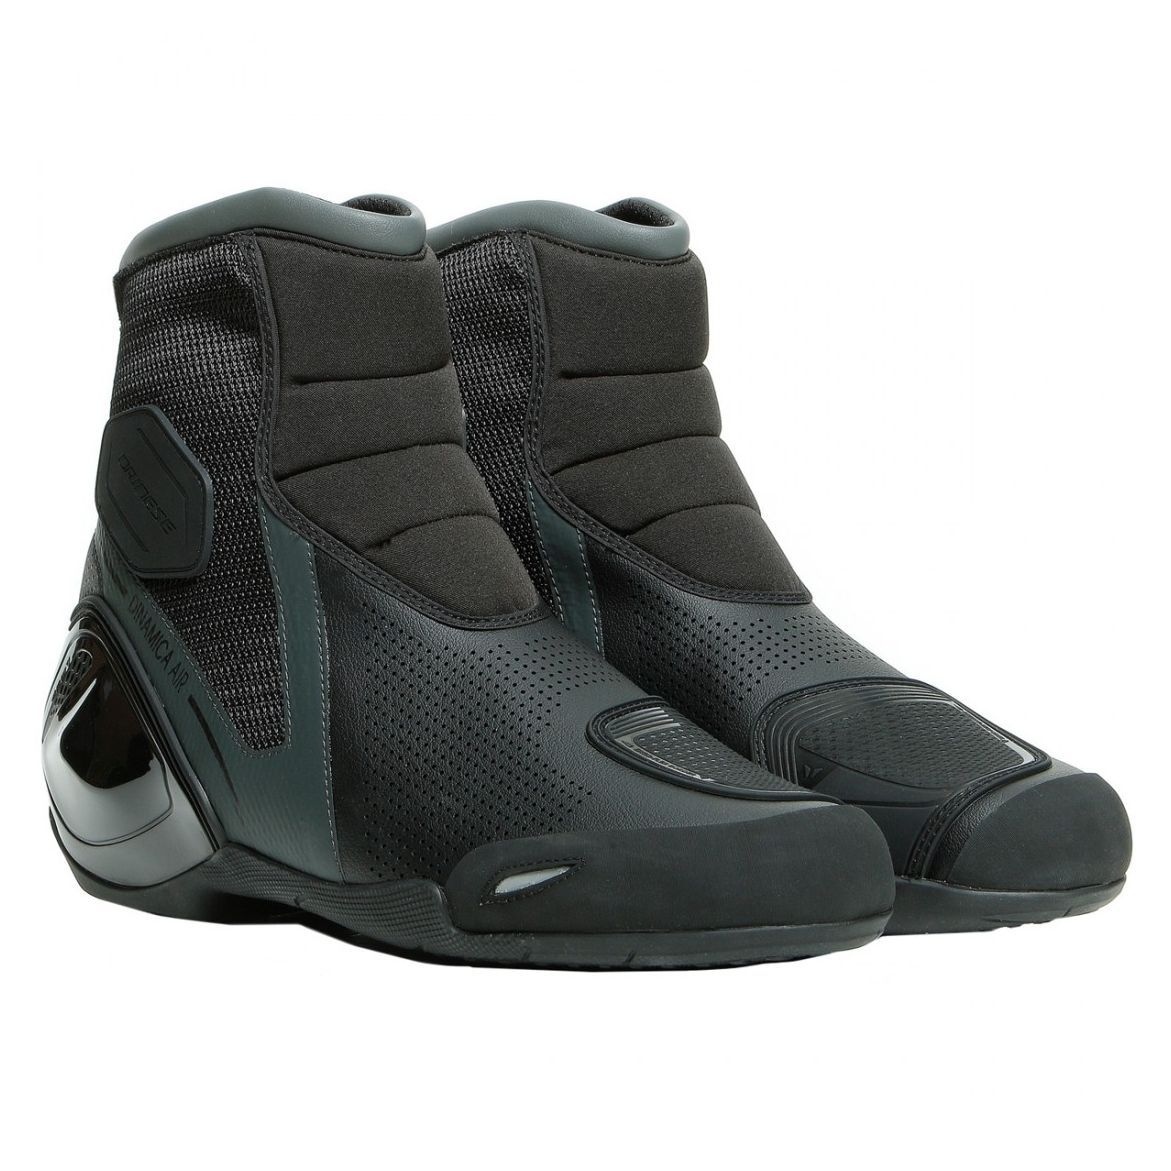  Bottes Dainese Dinamica Air Dainese-dinamica-air-black-anthracite-604-1-m-200029481-xlarge